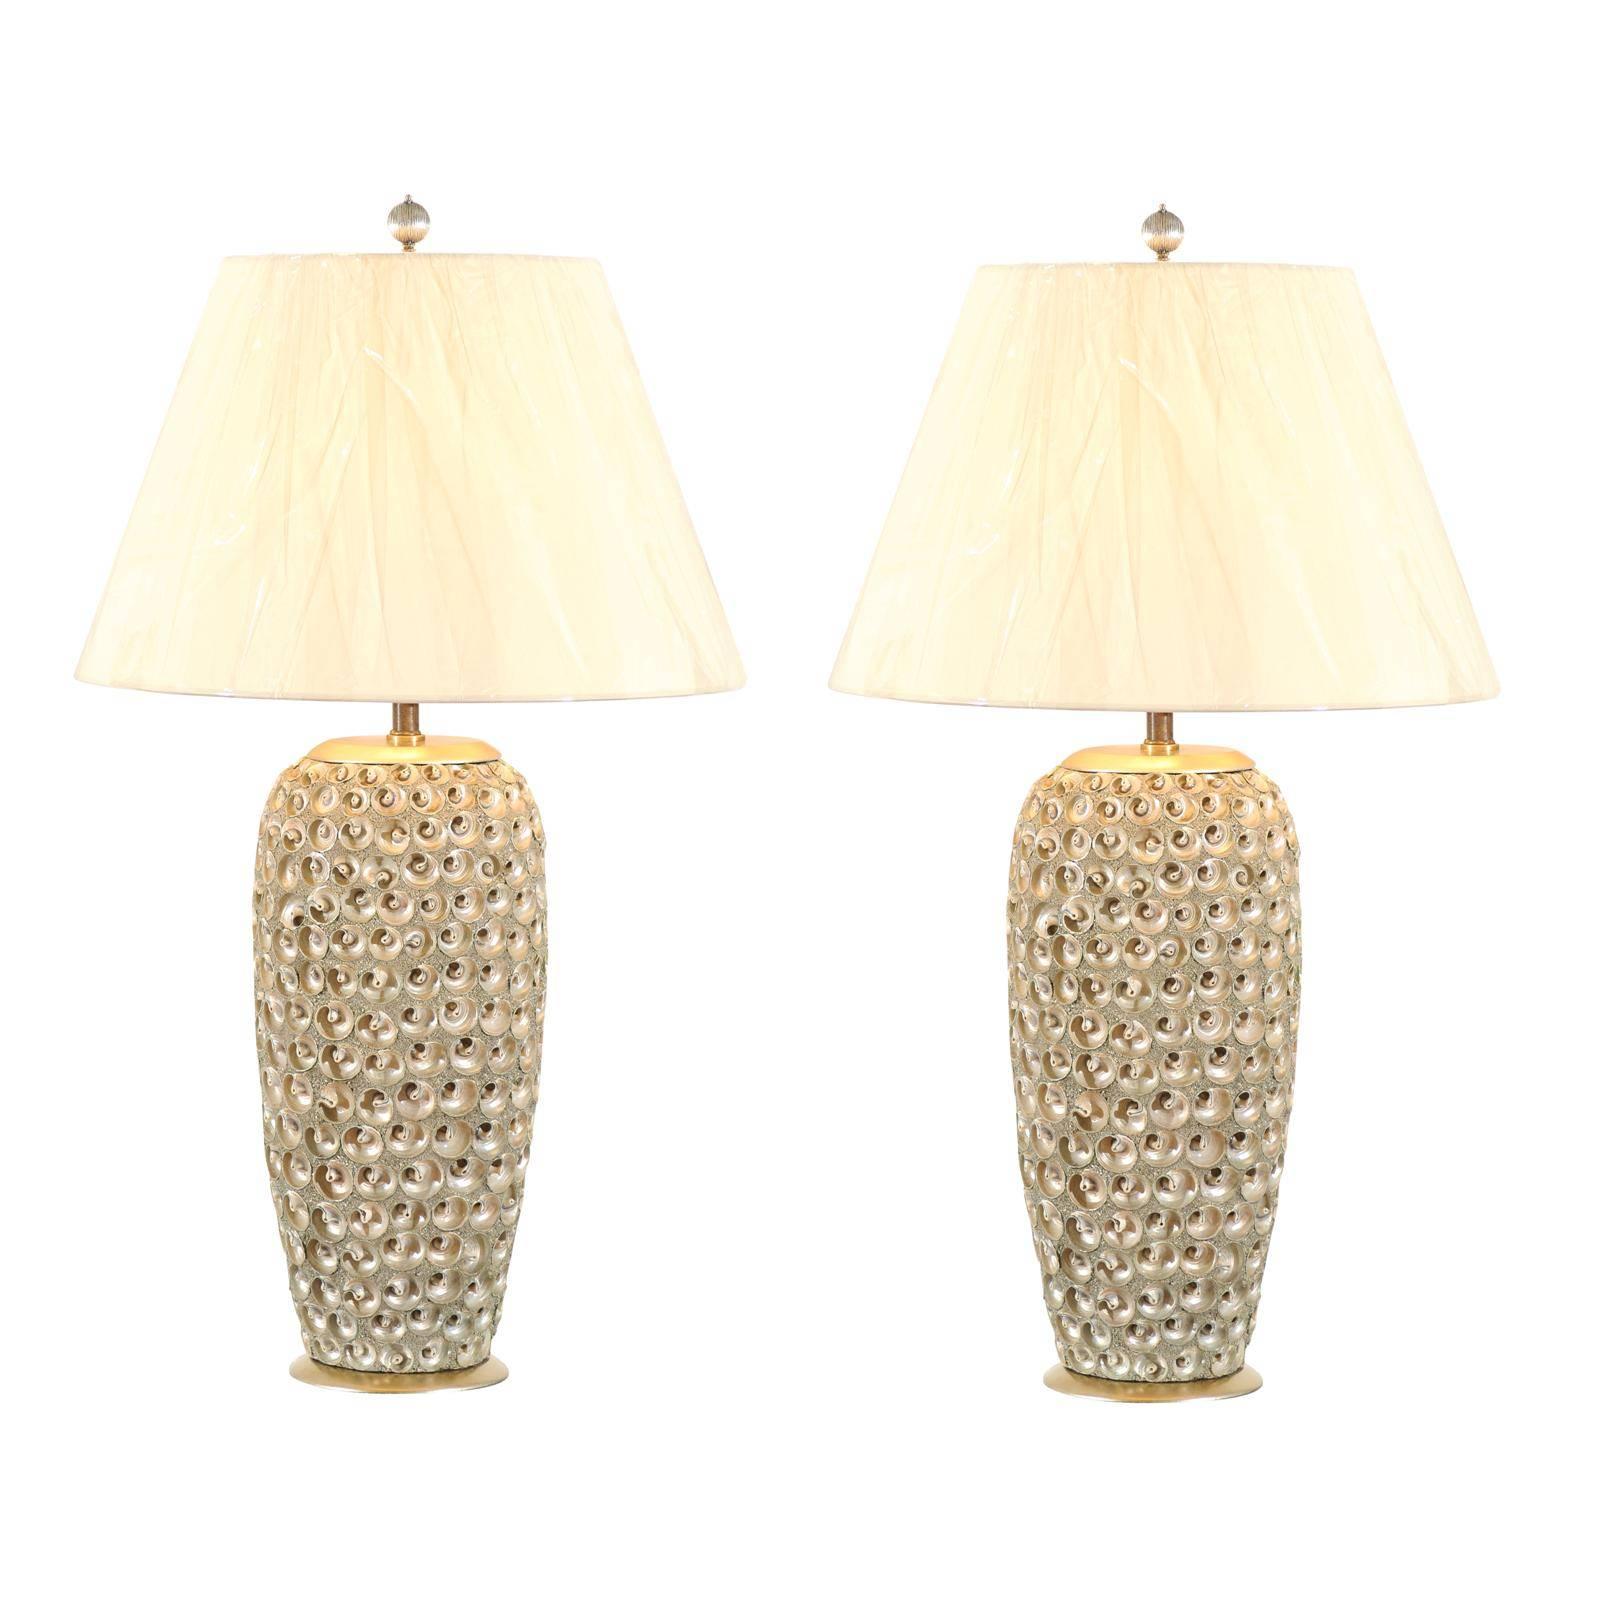 Pair of Modern Large-Scale Shell Lamps with Lucite and Silver Leaf Accents For Sale